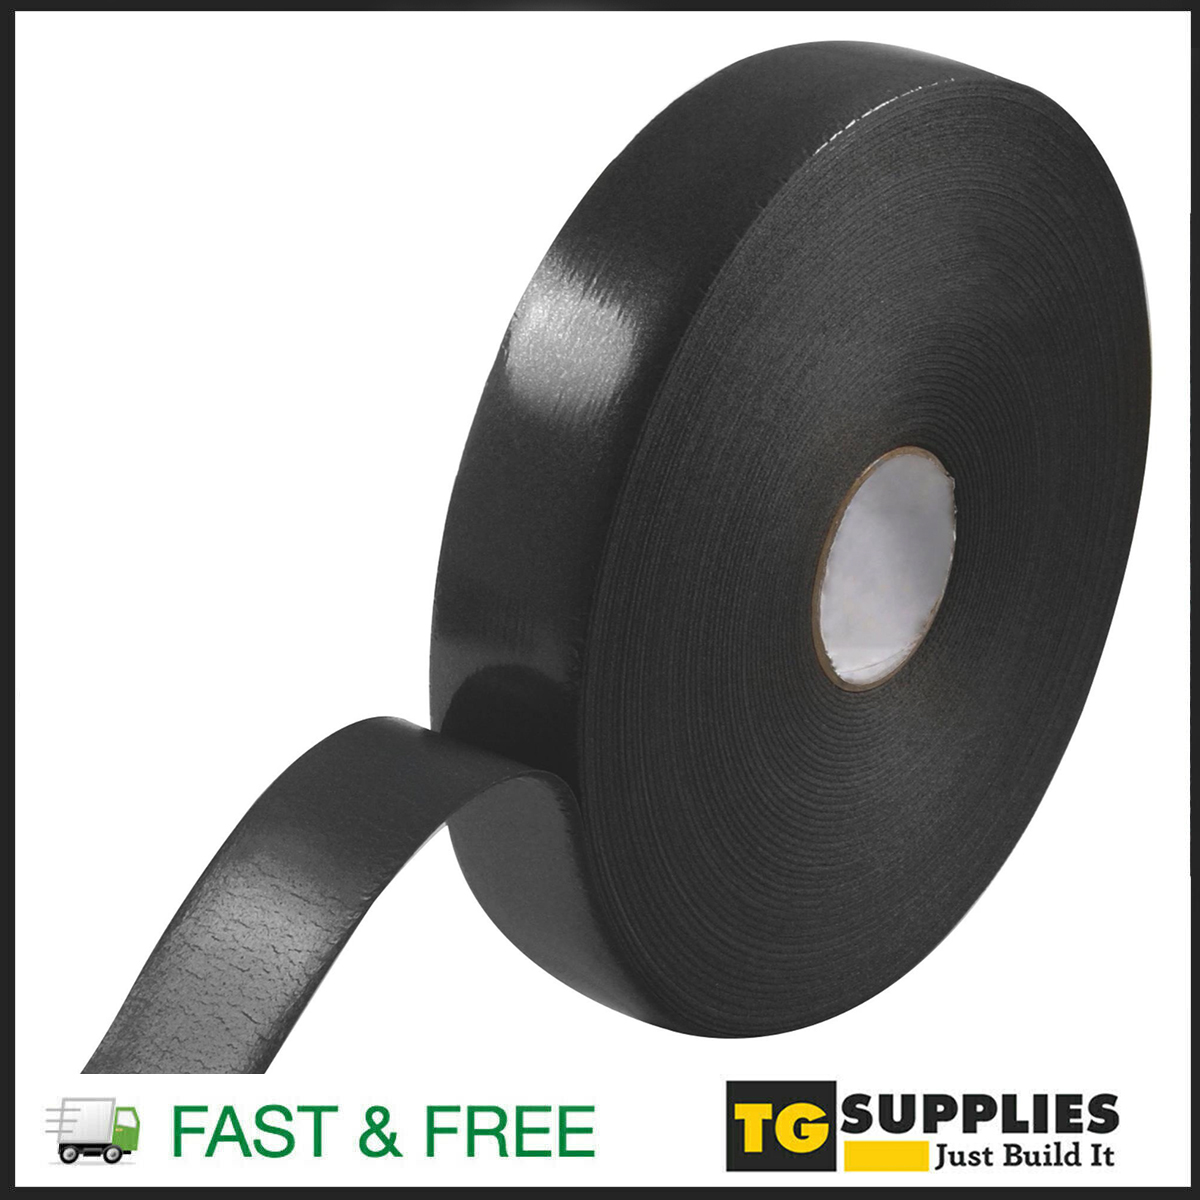 acoustic tape, noise reduction tape, thermal insulation tape, glazing tape, tape for polycarbonate sheets, friction reduction tape, ez glaze tape, ez glaze friction reduction tape